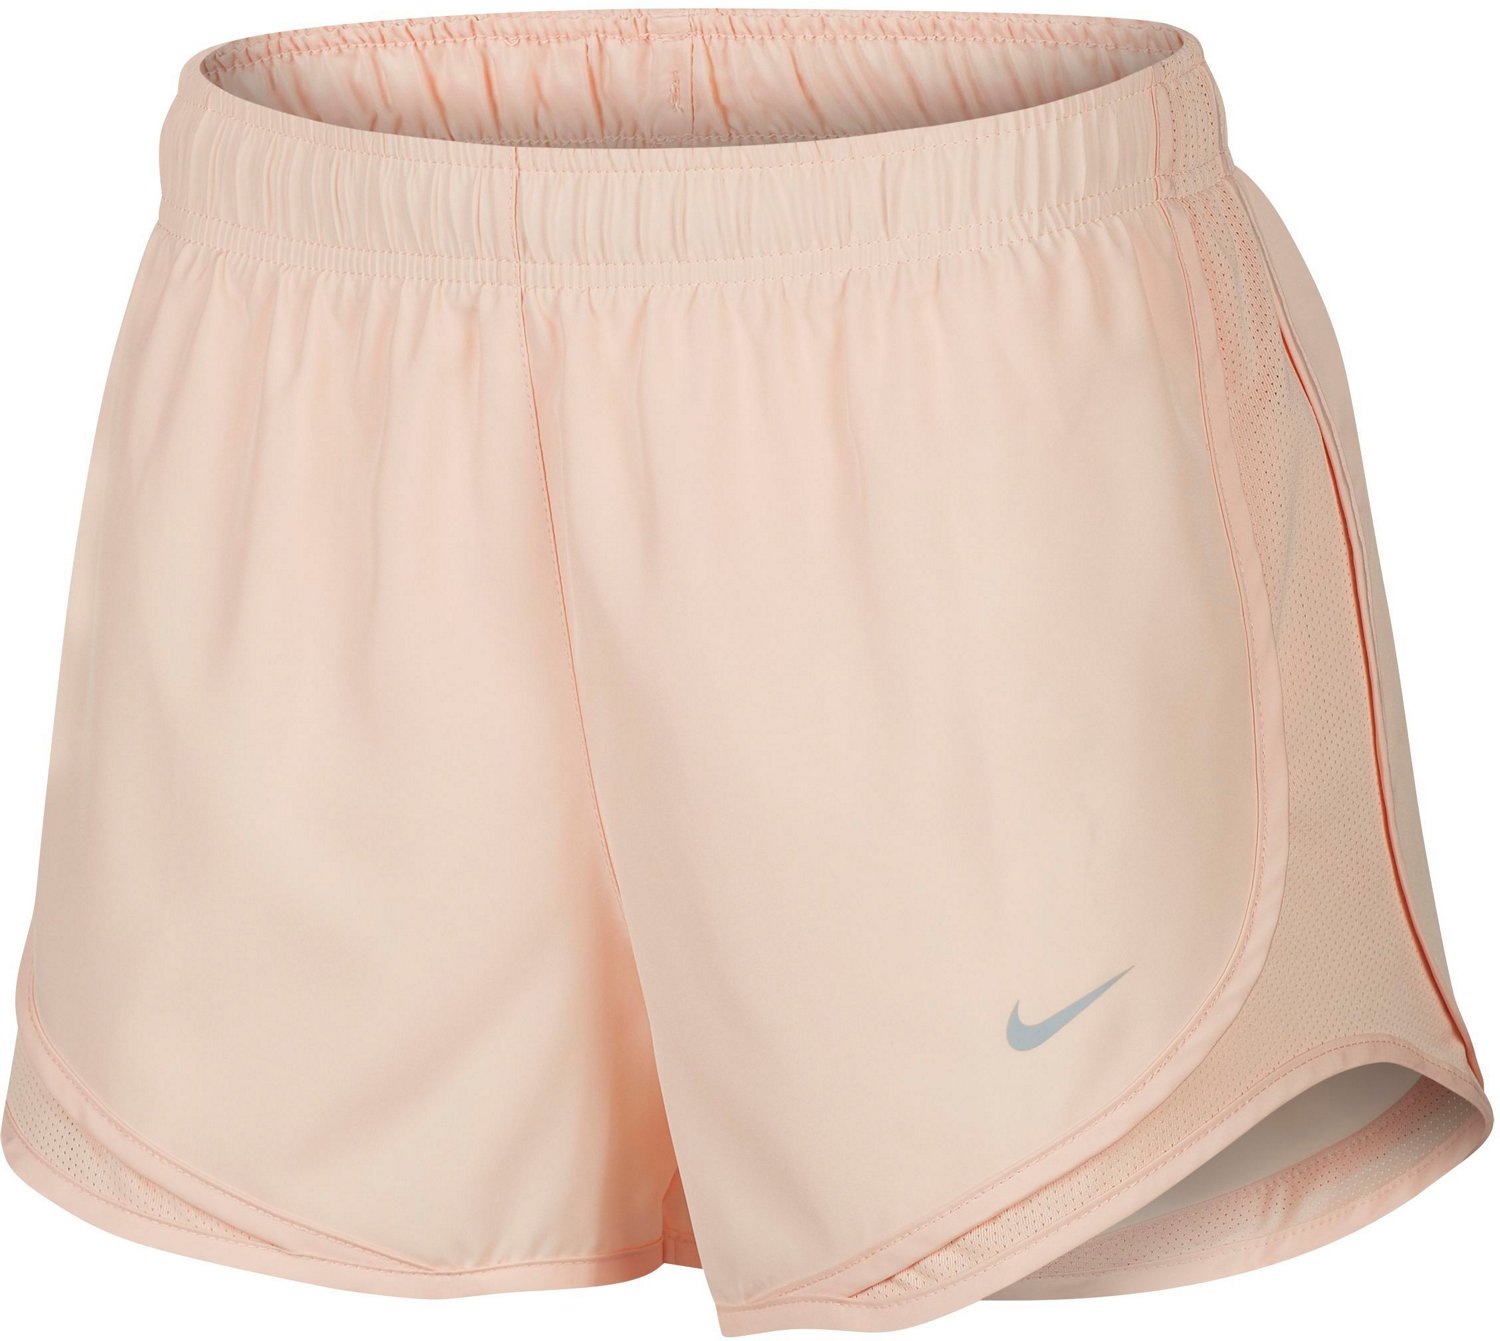 light pink nike clothes